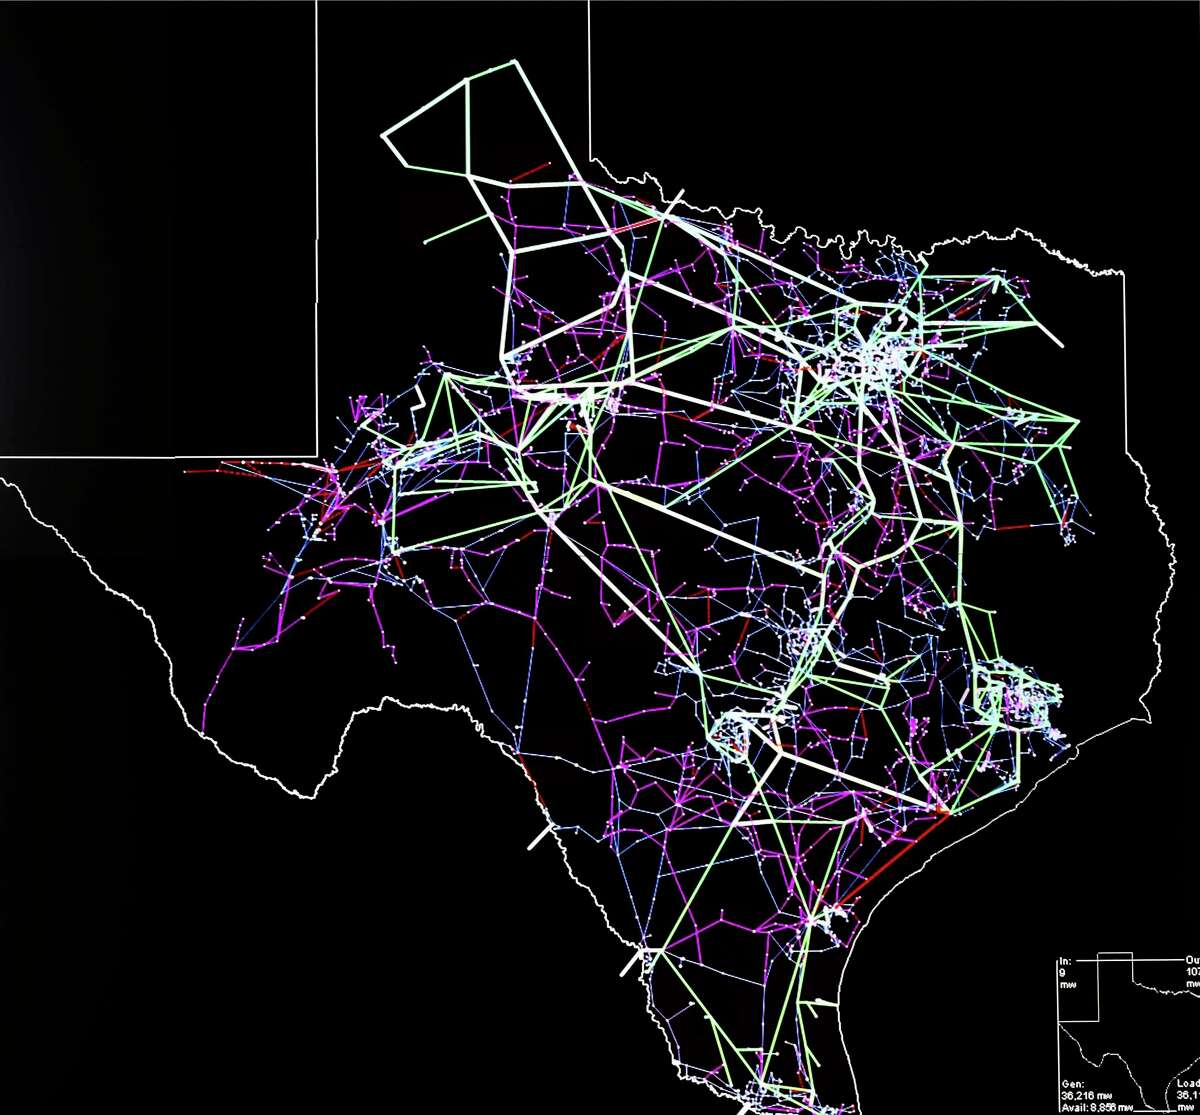 A view of the state's grid of transmission lines is monitored in the control room of the Electric Reliability Council of Texas (ERCOT), the state's grid operator on Tuesday, Jan. 30, 2018. (Kin Man Hui/San Antonio Express-News)